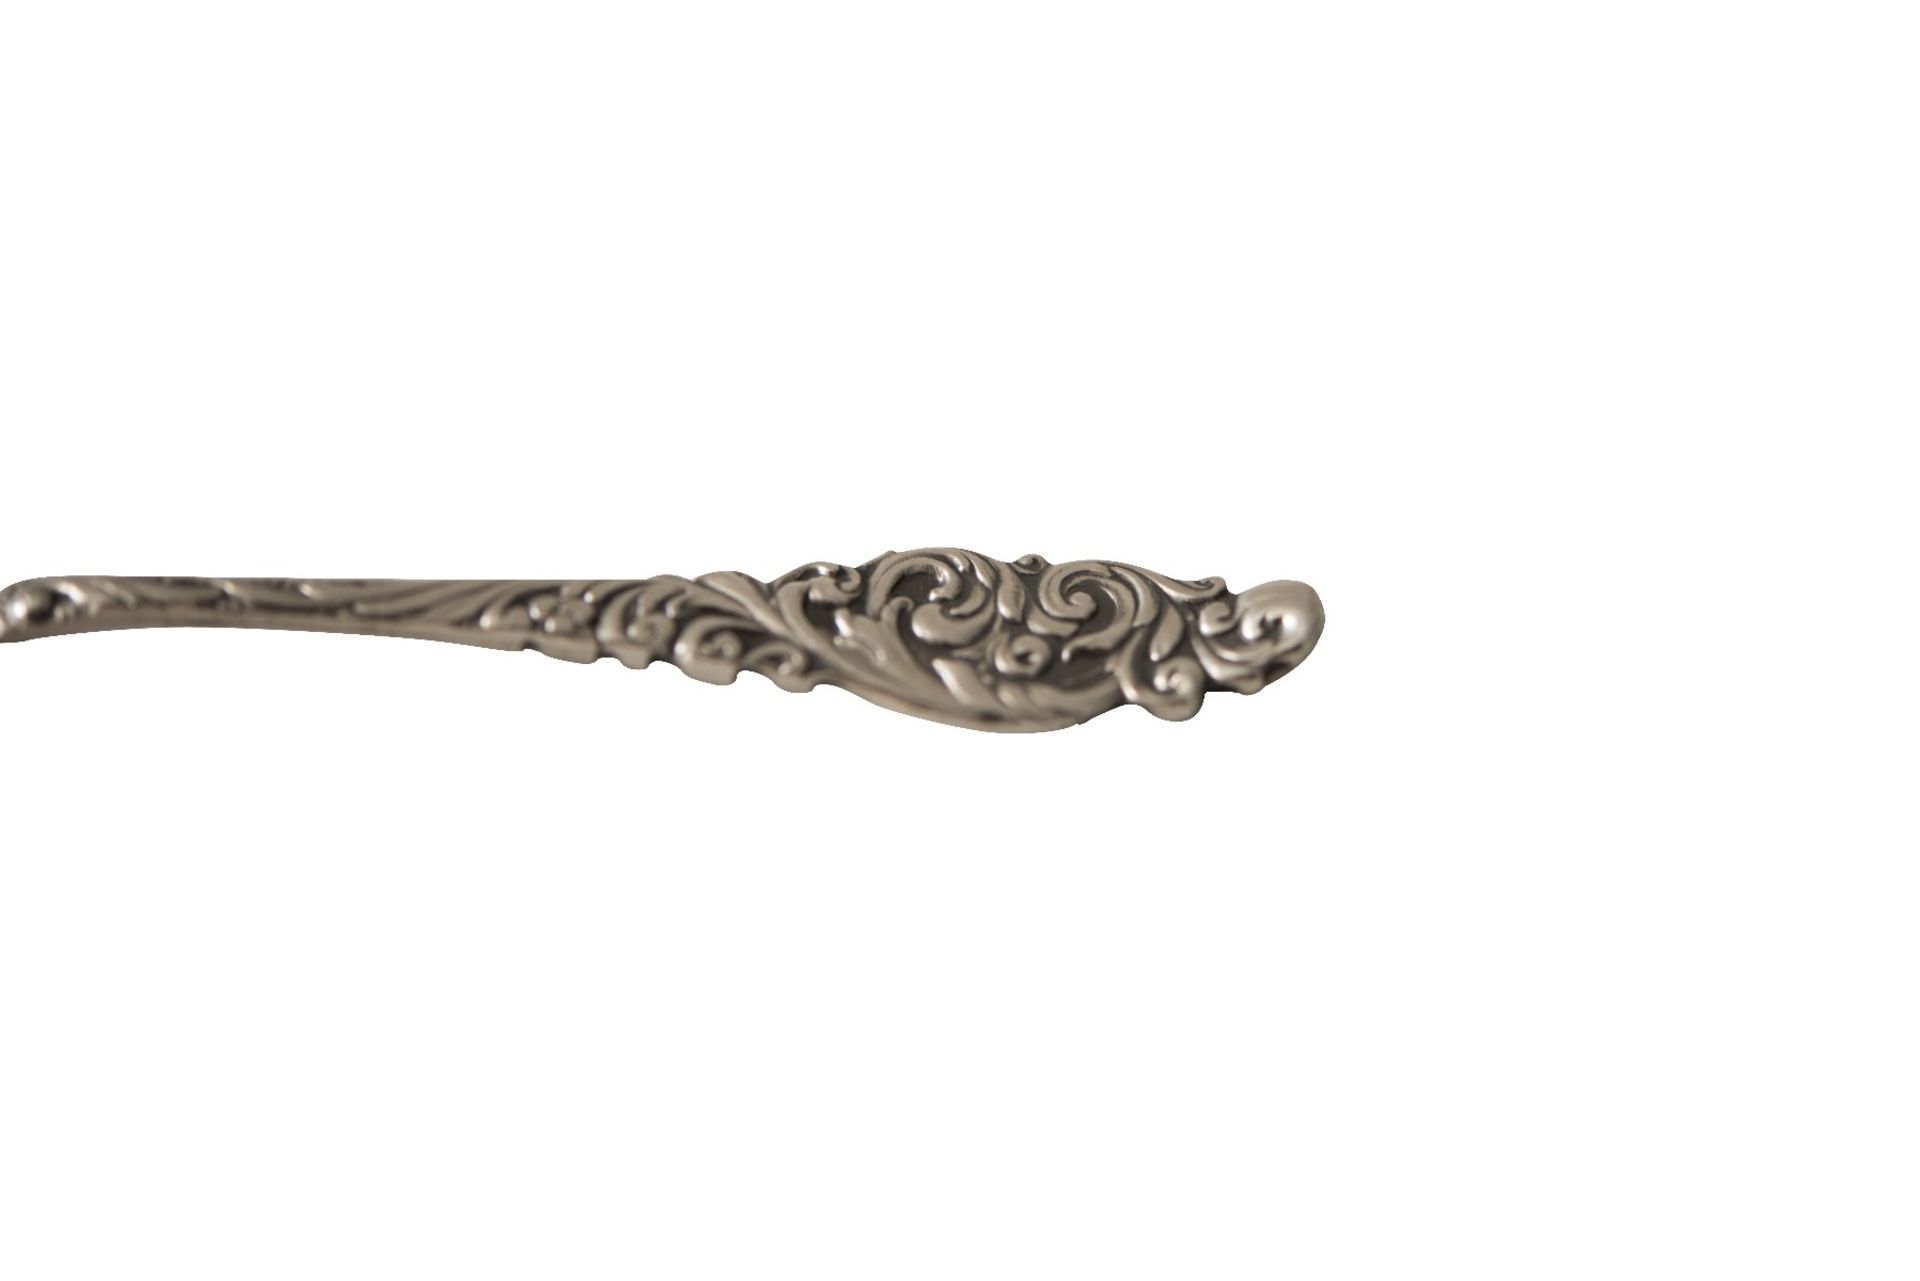 Coffee spoon with decorated handles - Image 8 of 8